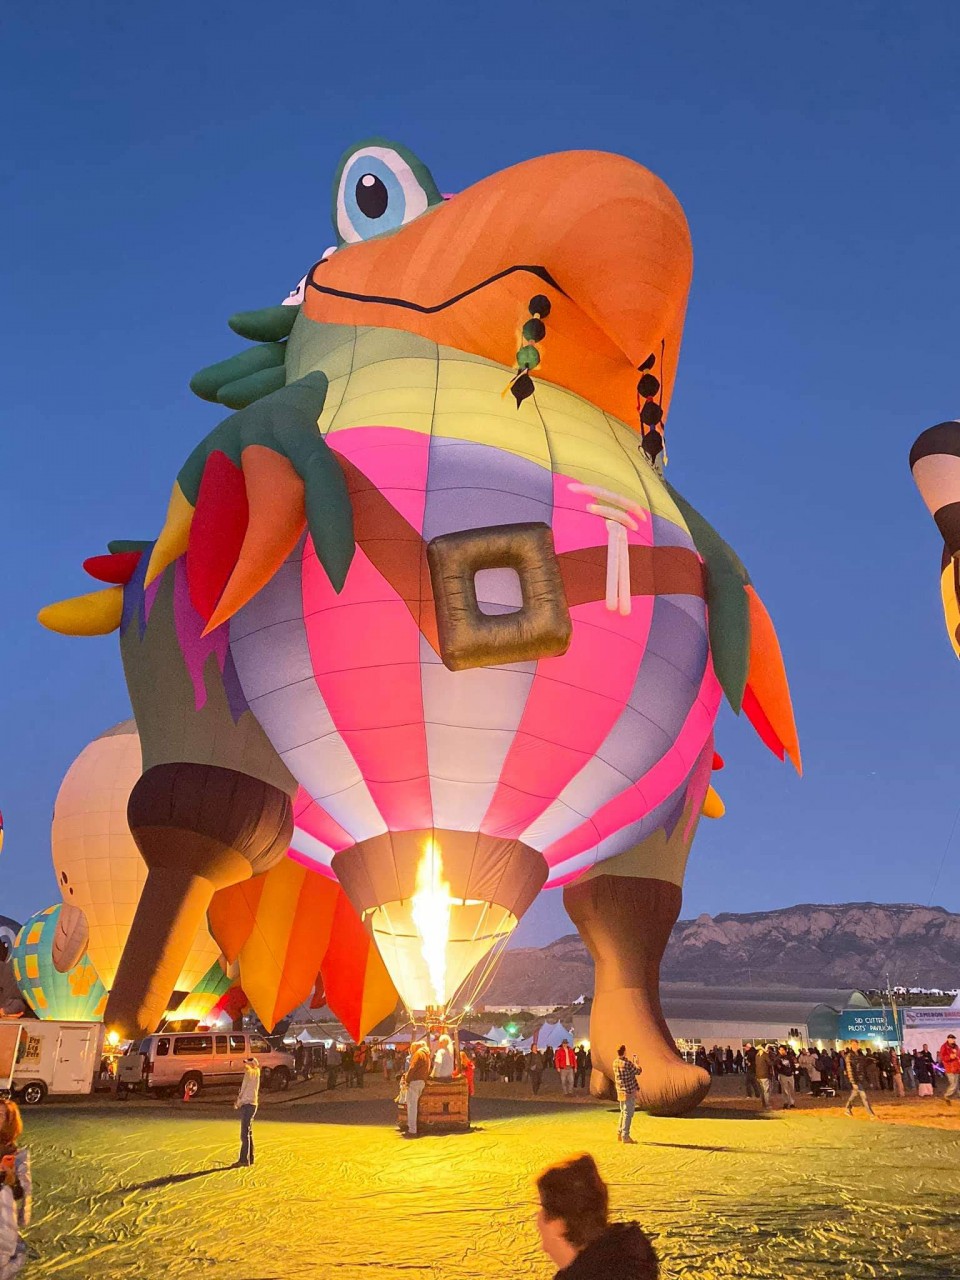 The Albuquerque New Mexico Balloon glow begins with beautiful themed hot air balloons 